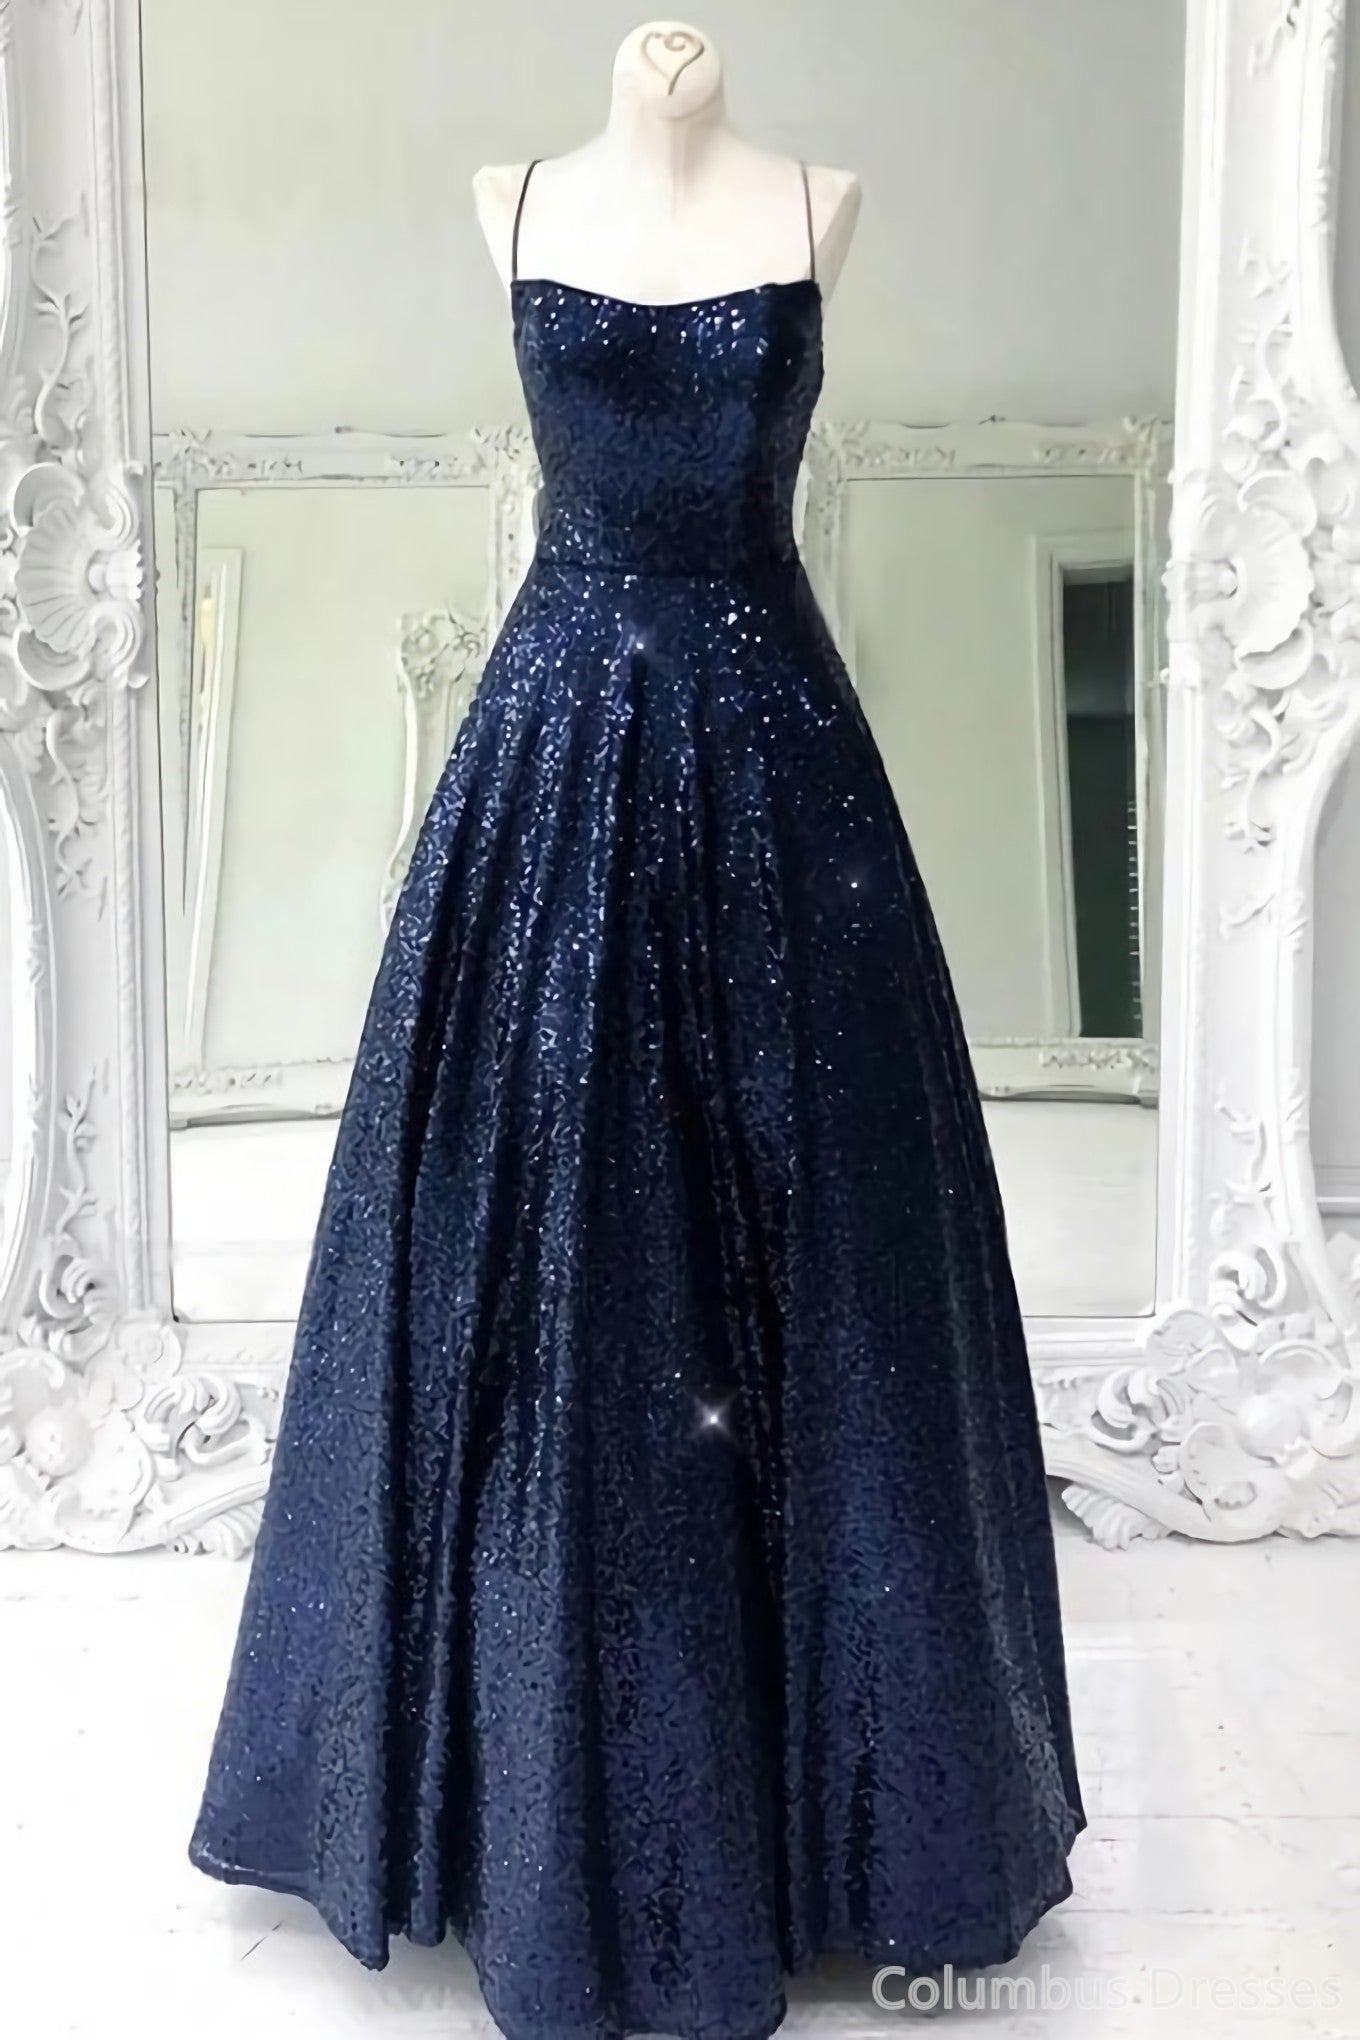 Stunning Sleeveless A Line Navy Blue Sequin Corset Prom Dresses outfit, Party Dresses For Girl